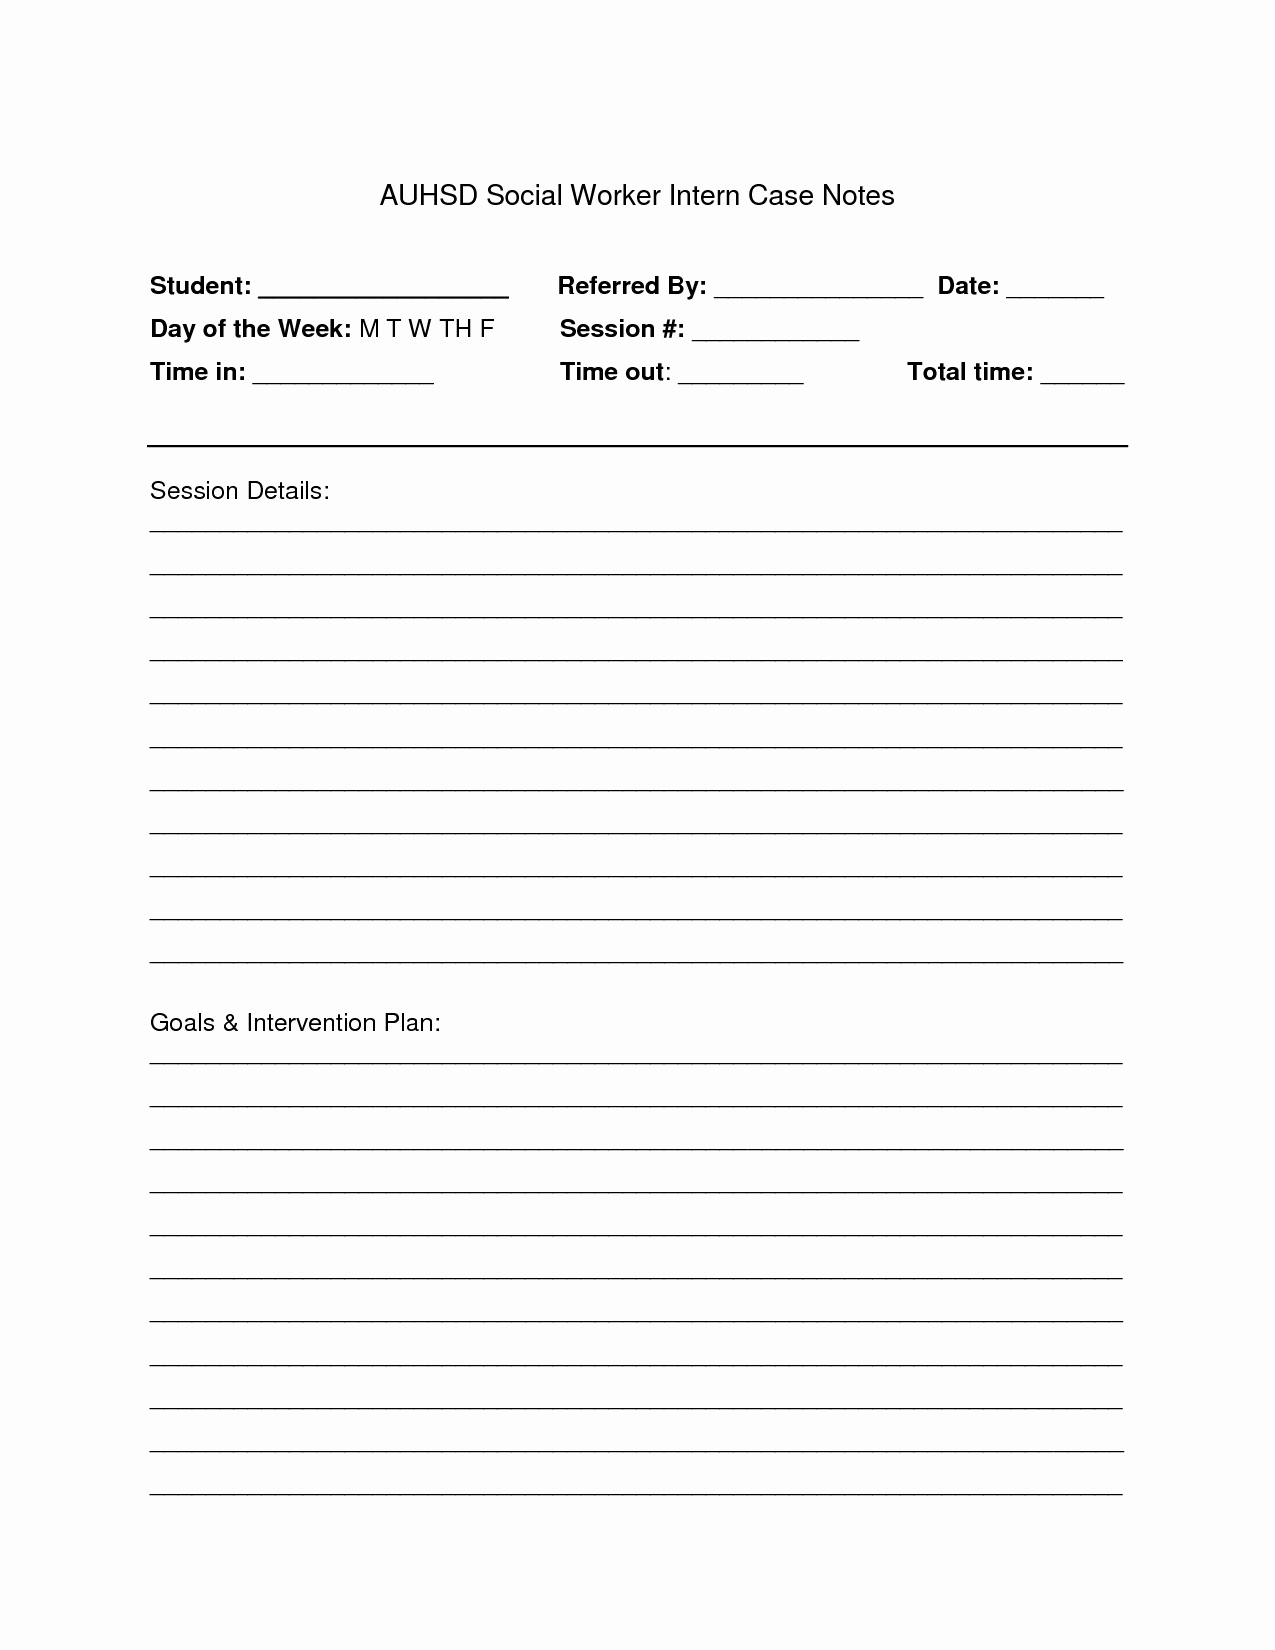 Social Work Case Notes Template Fresh Search Results for “social Work Case Notes Template